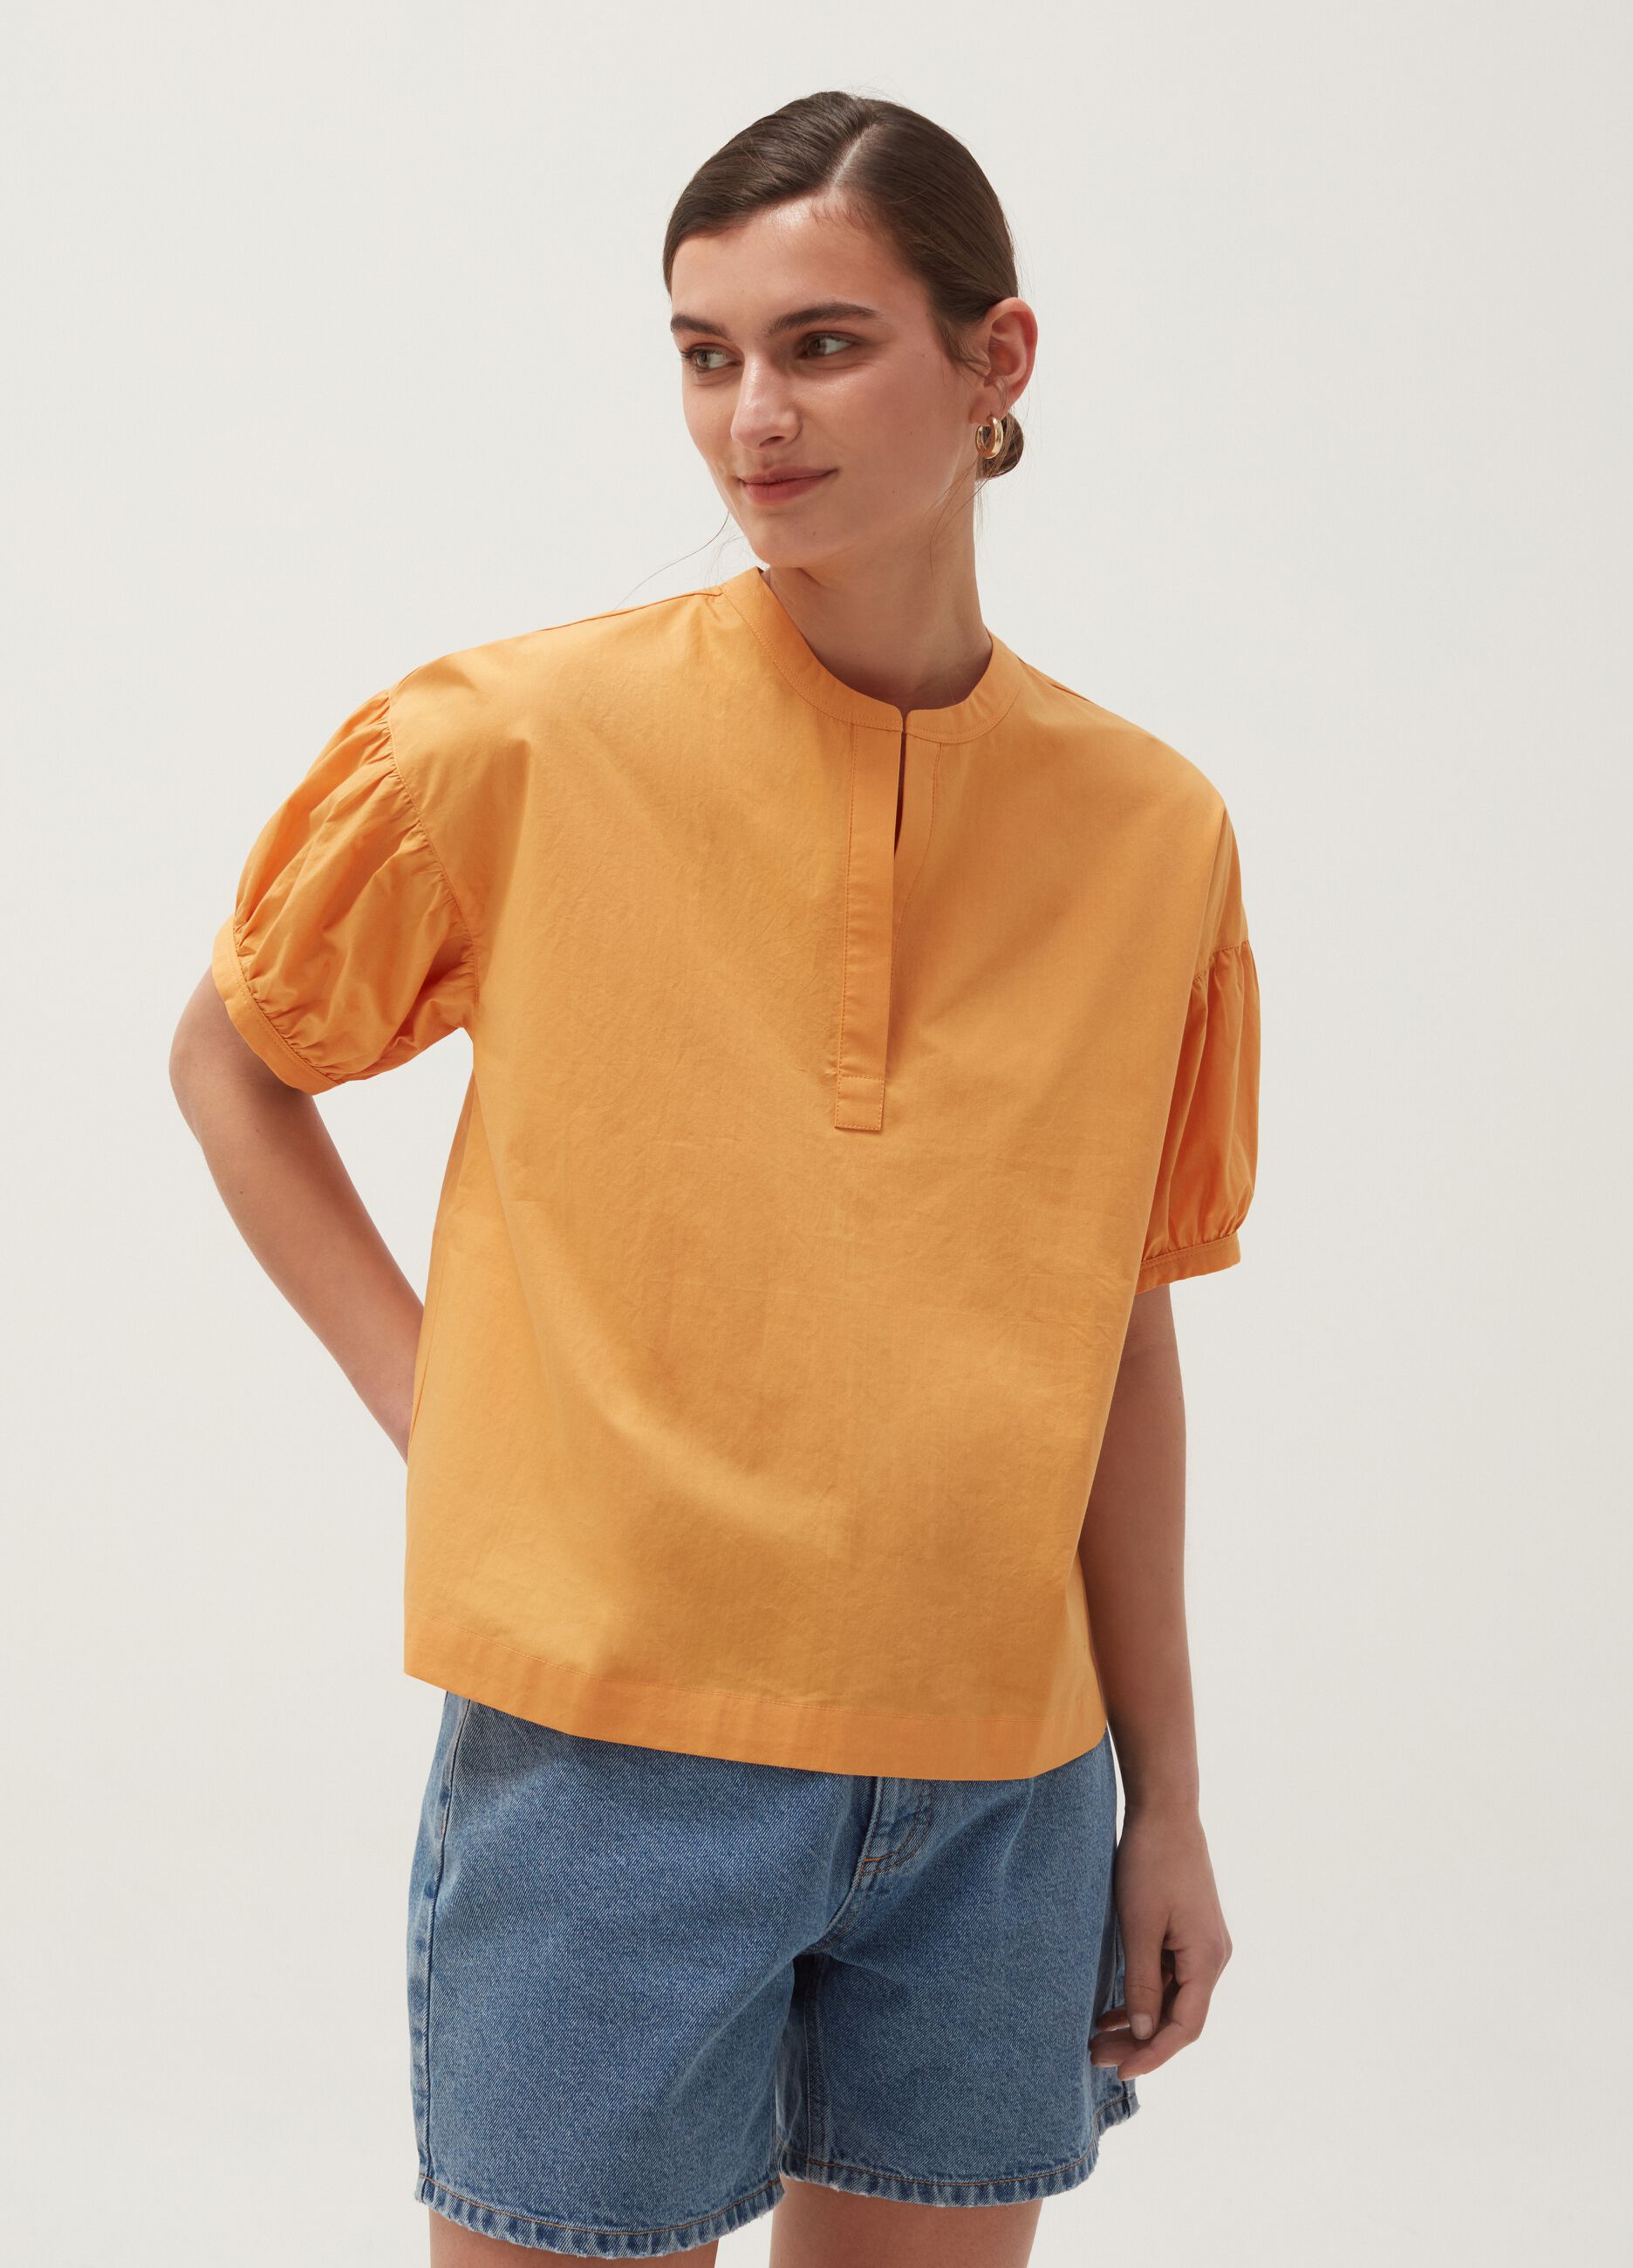 Cotton blouse with short puff sleeves.